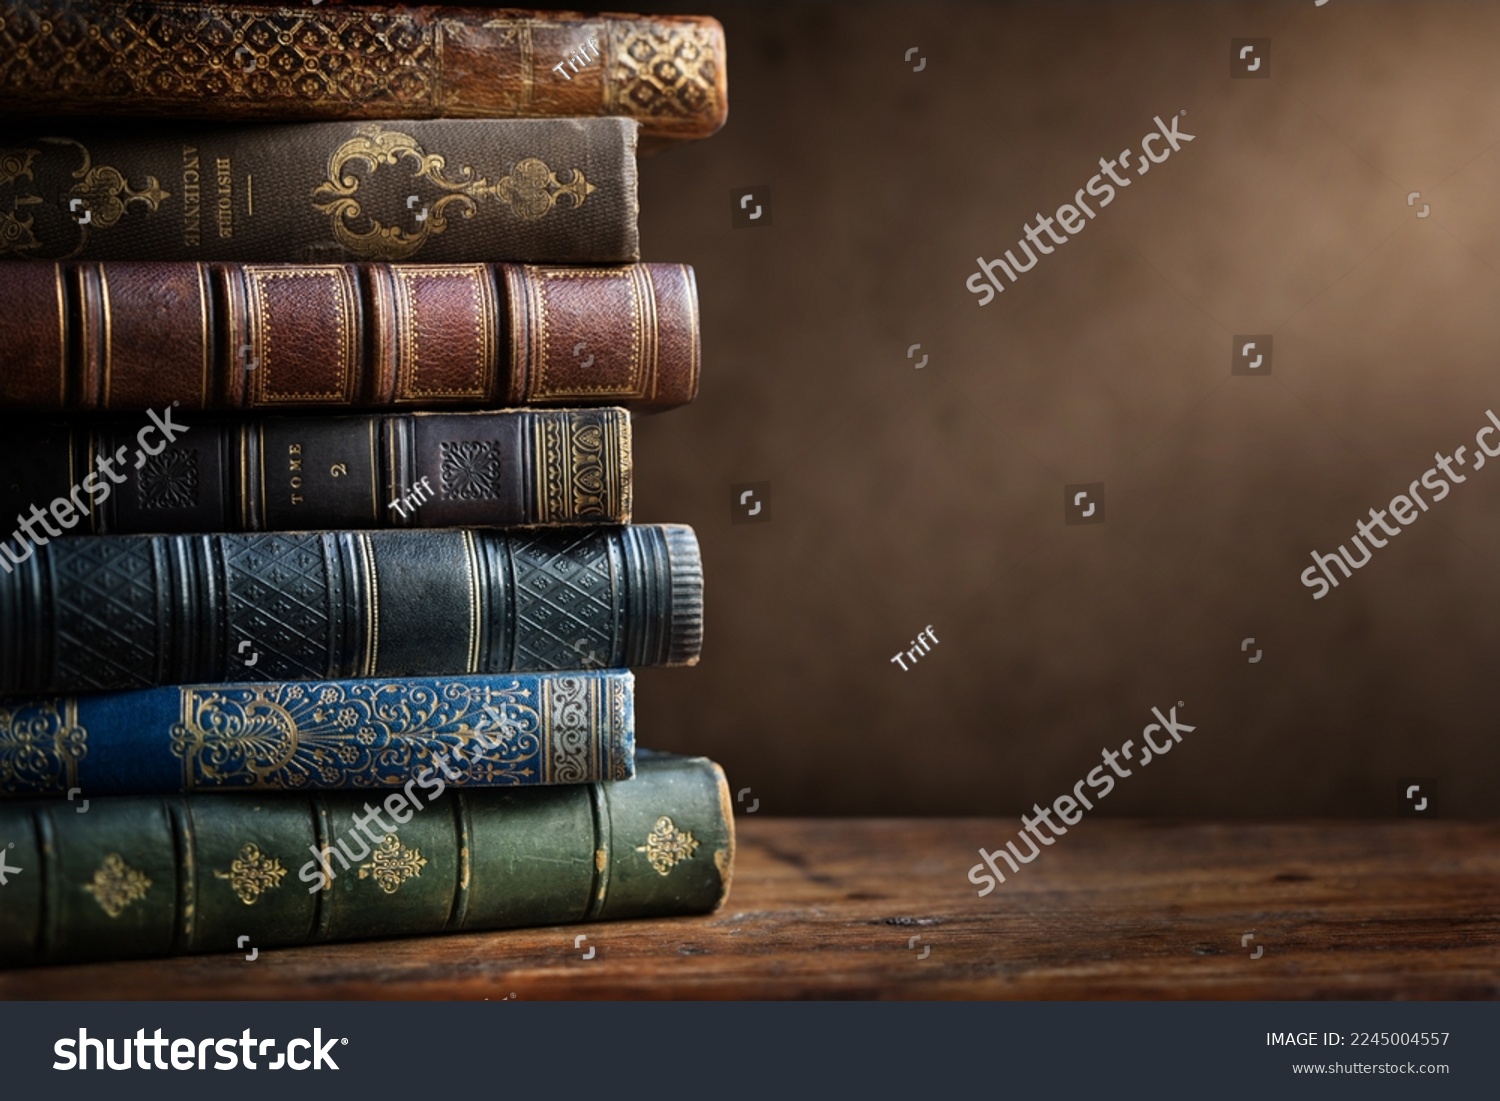 Old books on wooden desk and ray of light. Bookshelf history theme grunge background. Concept on the theme of history, nostalgia, old age. Retro style. Old book as a symbol of knowledge. #2245004557